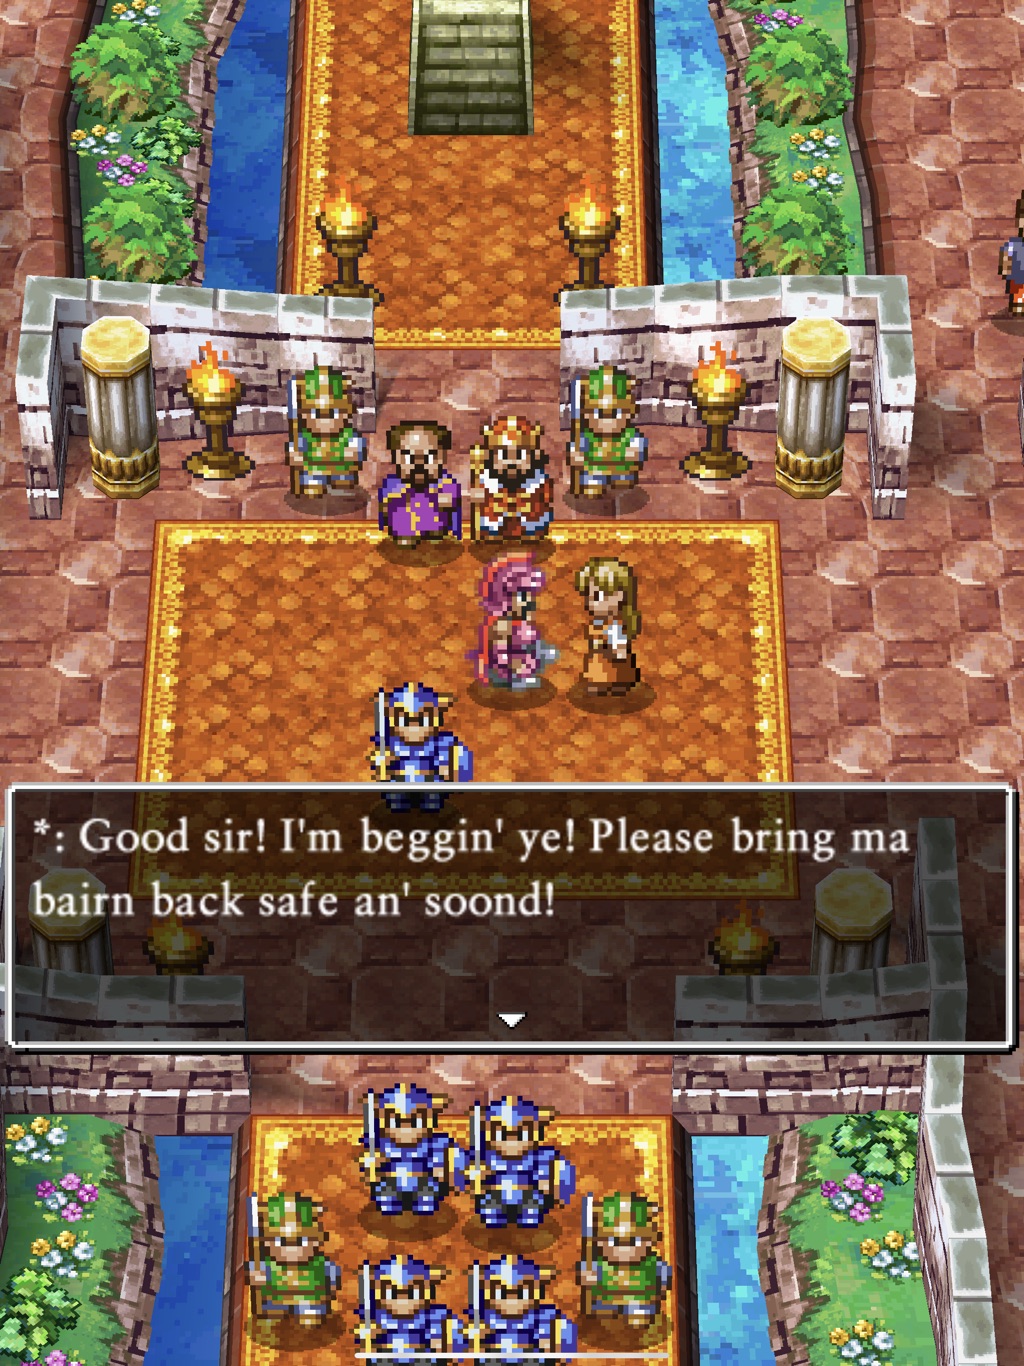 dragon-quest-iv-for-ios-buy-cheaper-in-official-store-psprices-usa